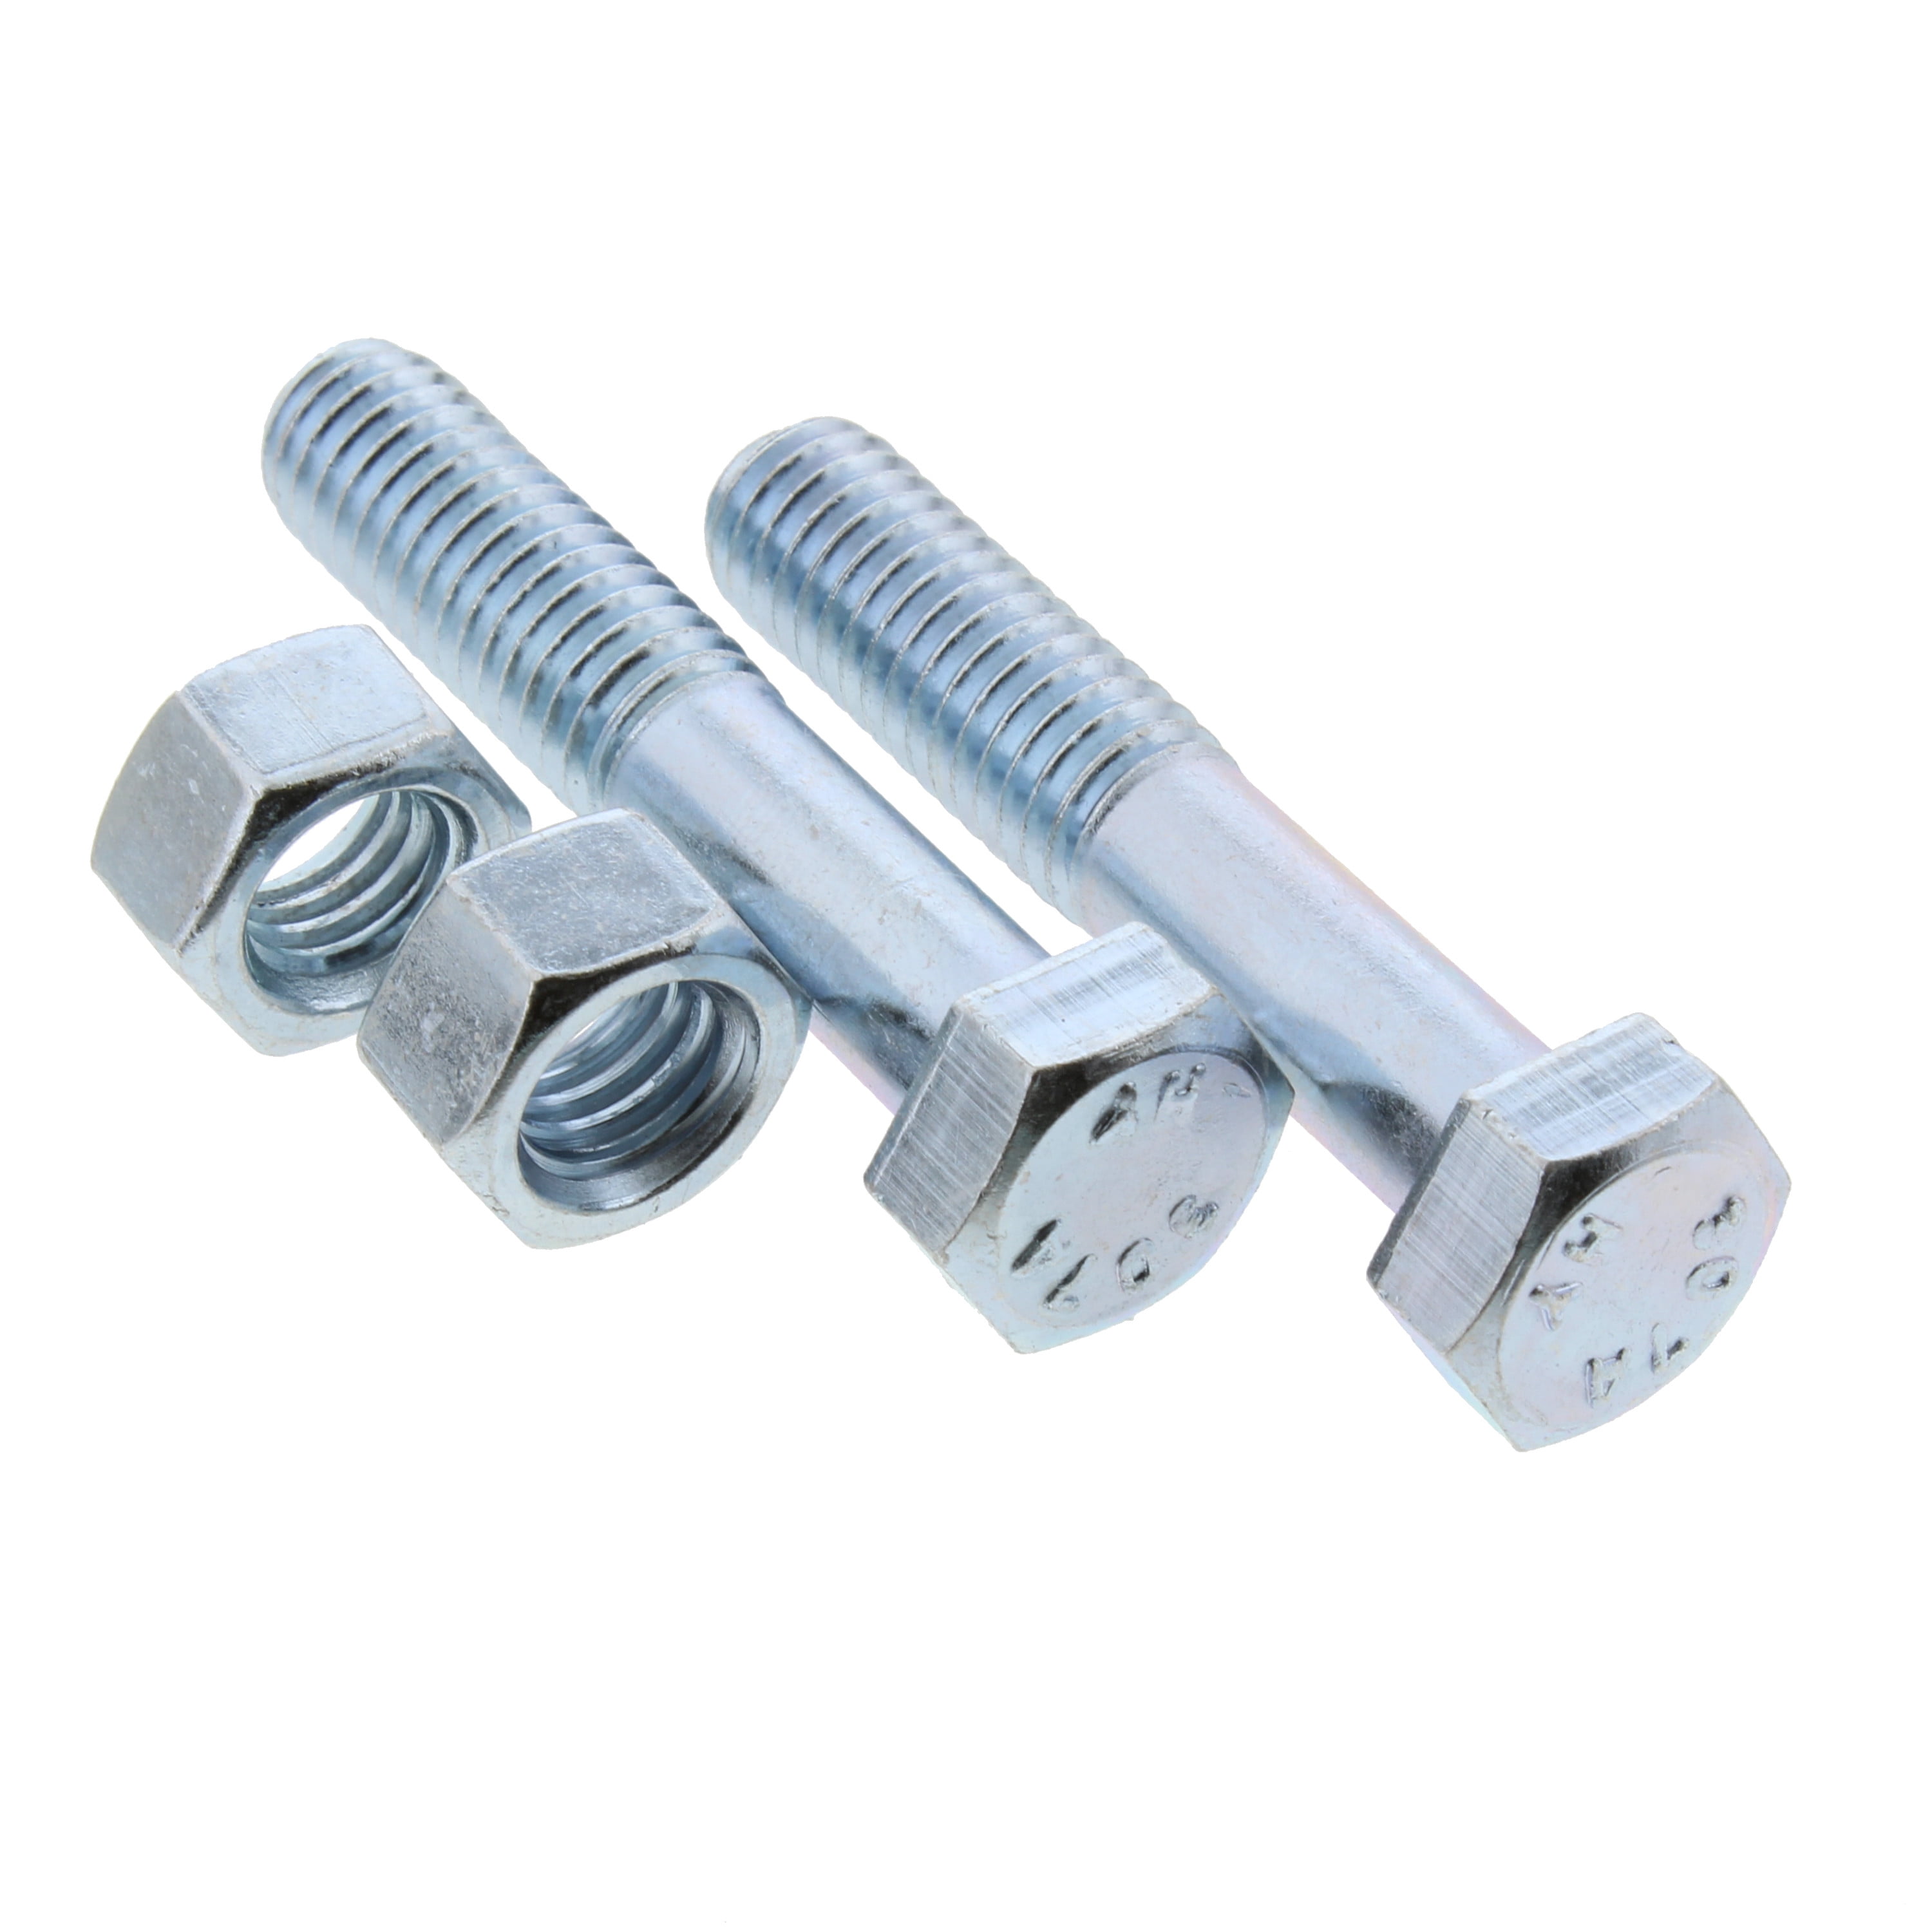 5pcs with nuts and washers 3/8-16 X 1 1/2 hex bolt bronze 